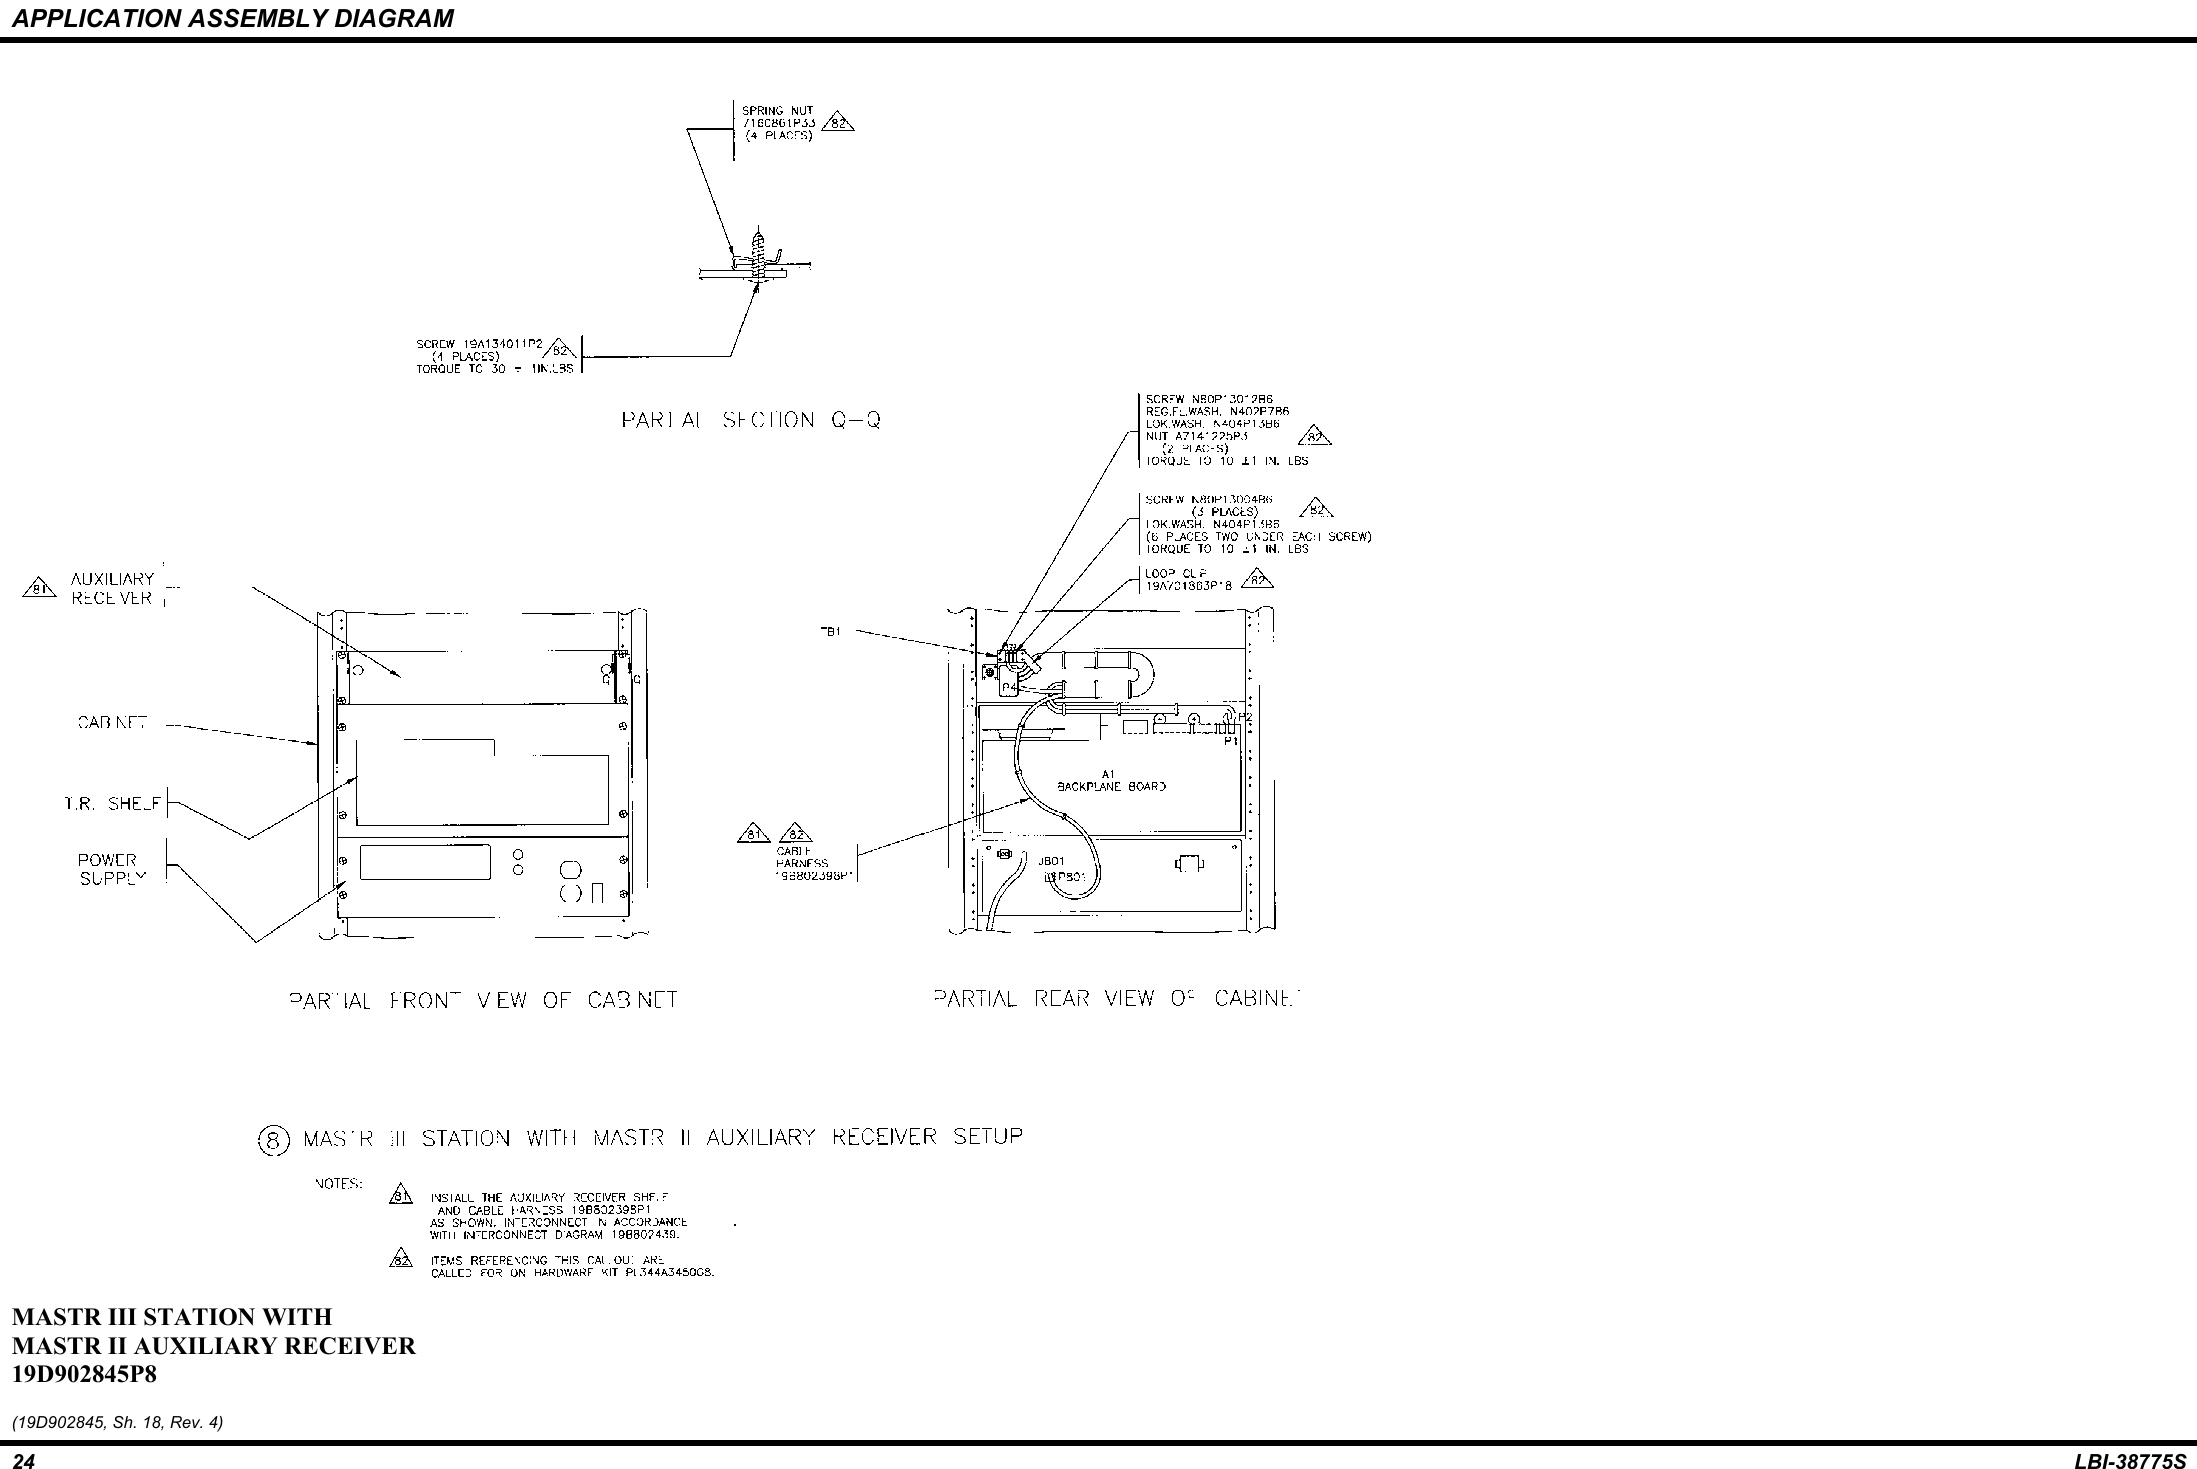 APPLICATION ASSEMBLY DIAGRAM24 LBI-38775SMASTR III STATION WITHMASTR II AUXILIARY RECEIVER19D902845P8(19D902845, Sh. 18, Rev. 4)